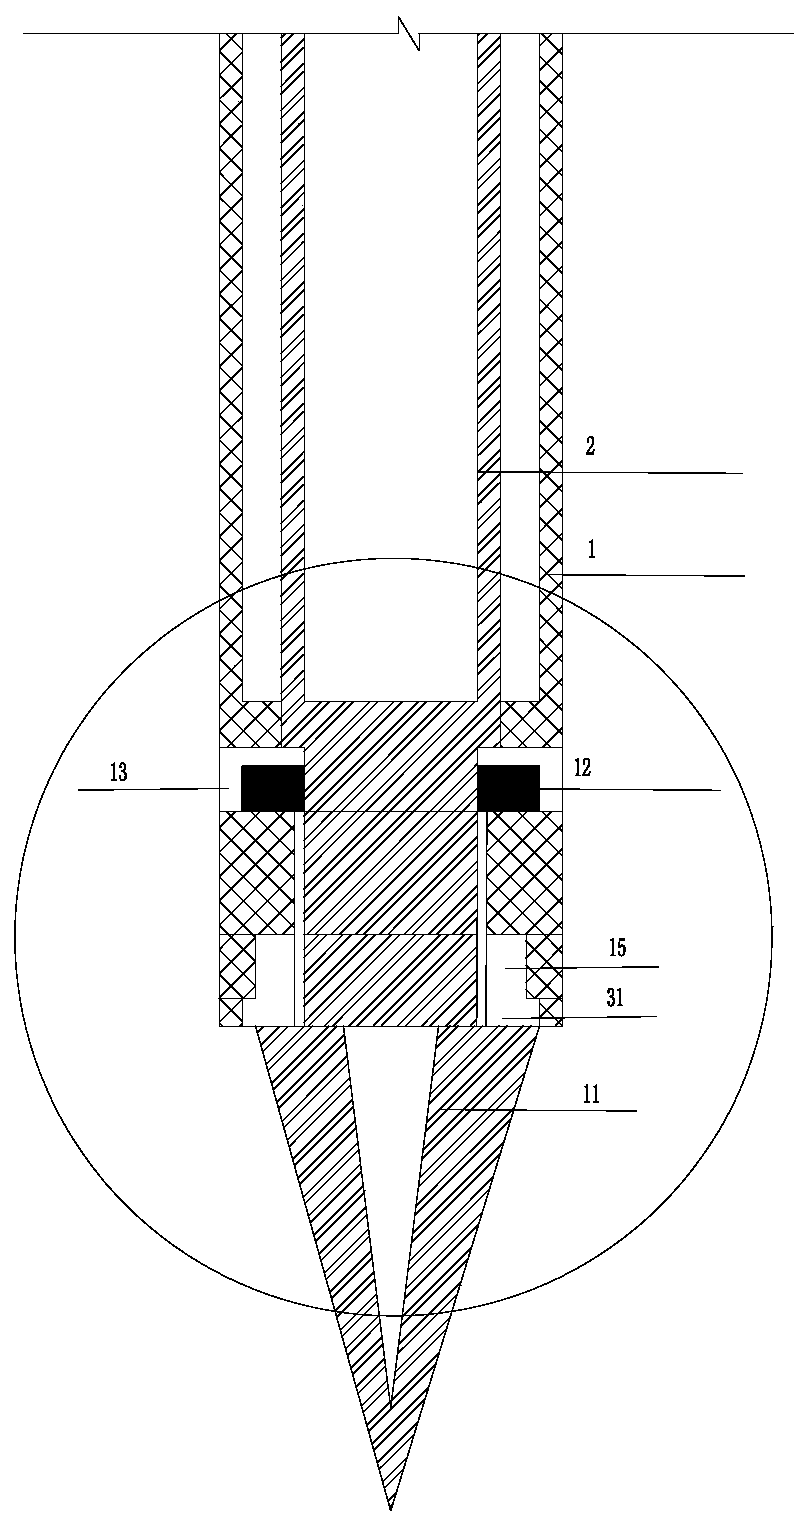 Novel implanted pressure relief well depressurization drainage system and method